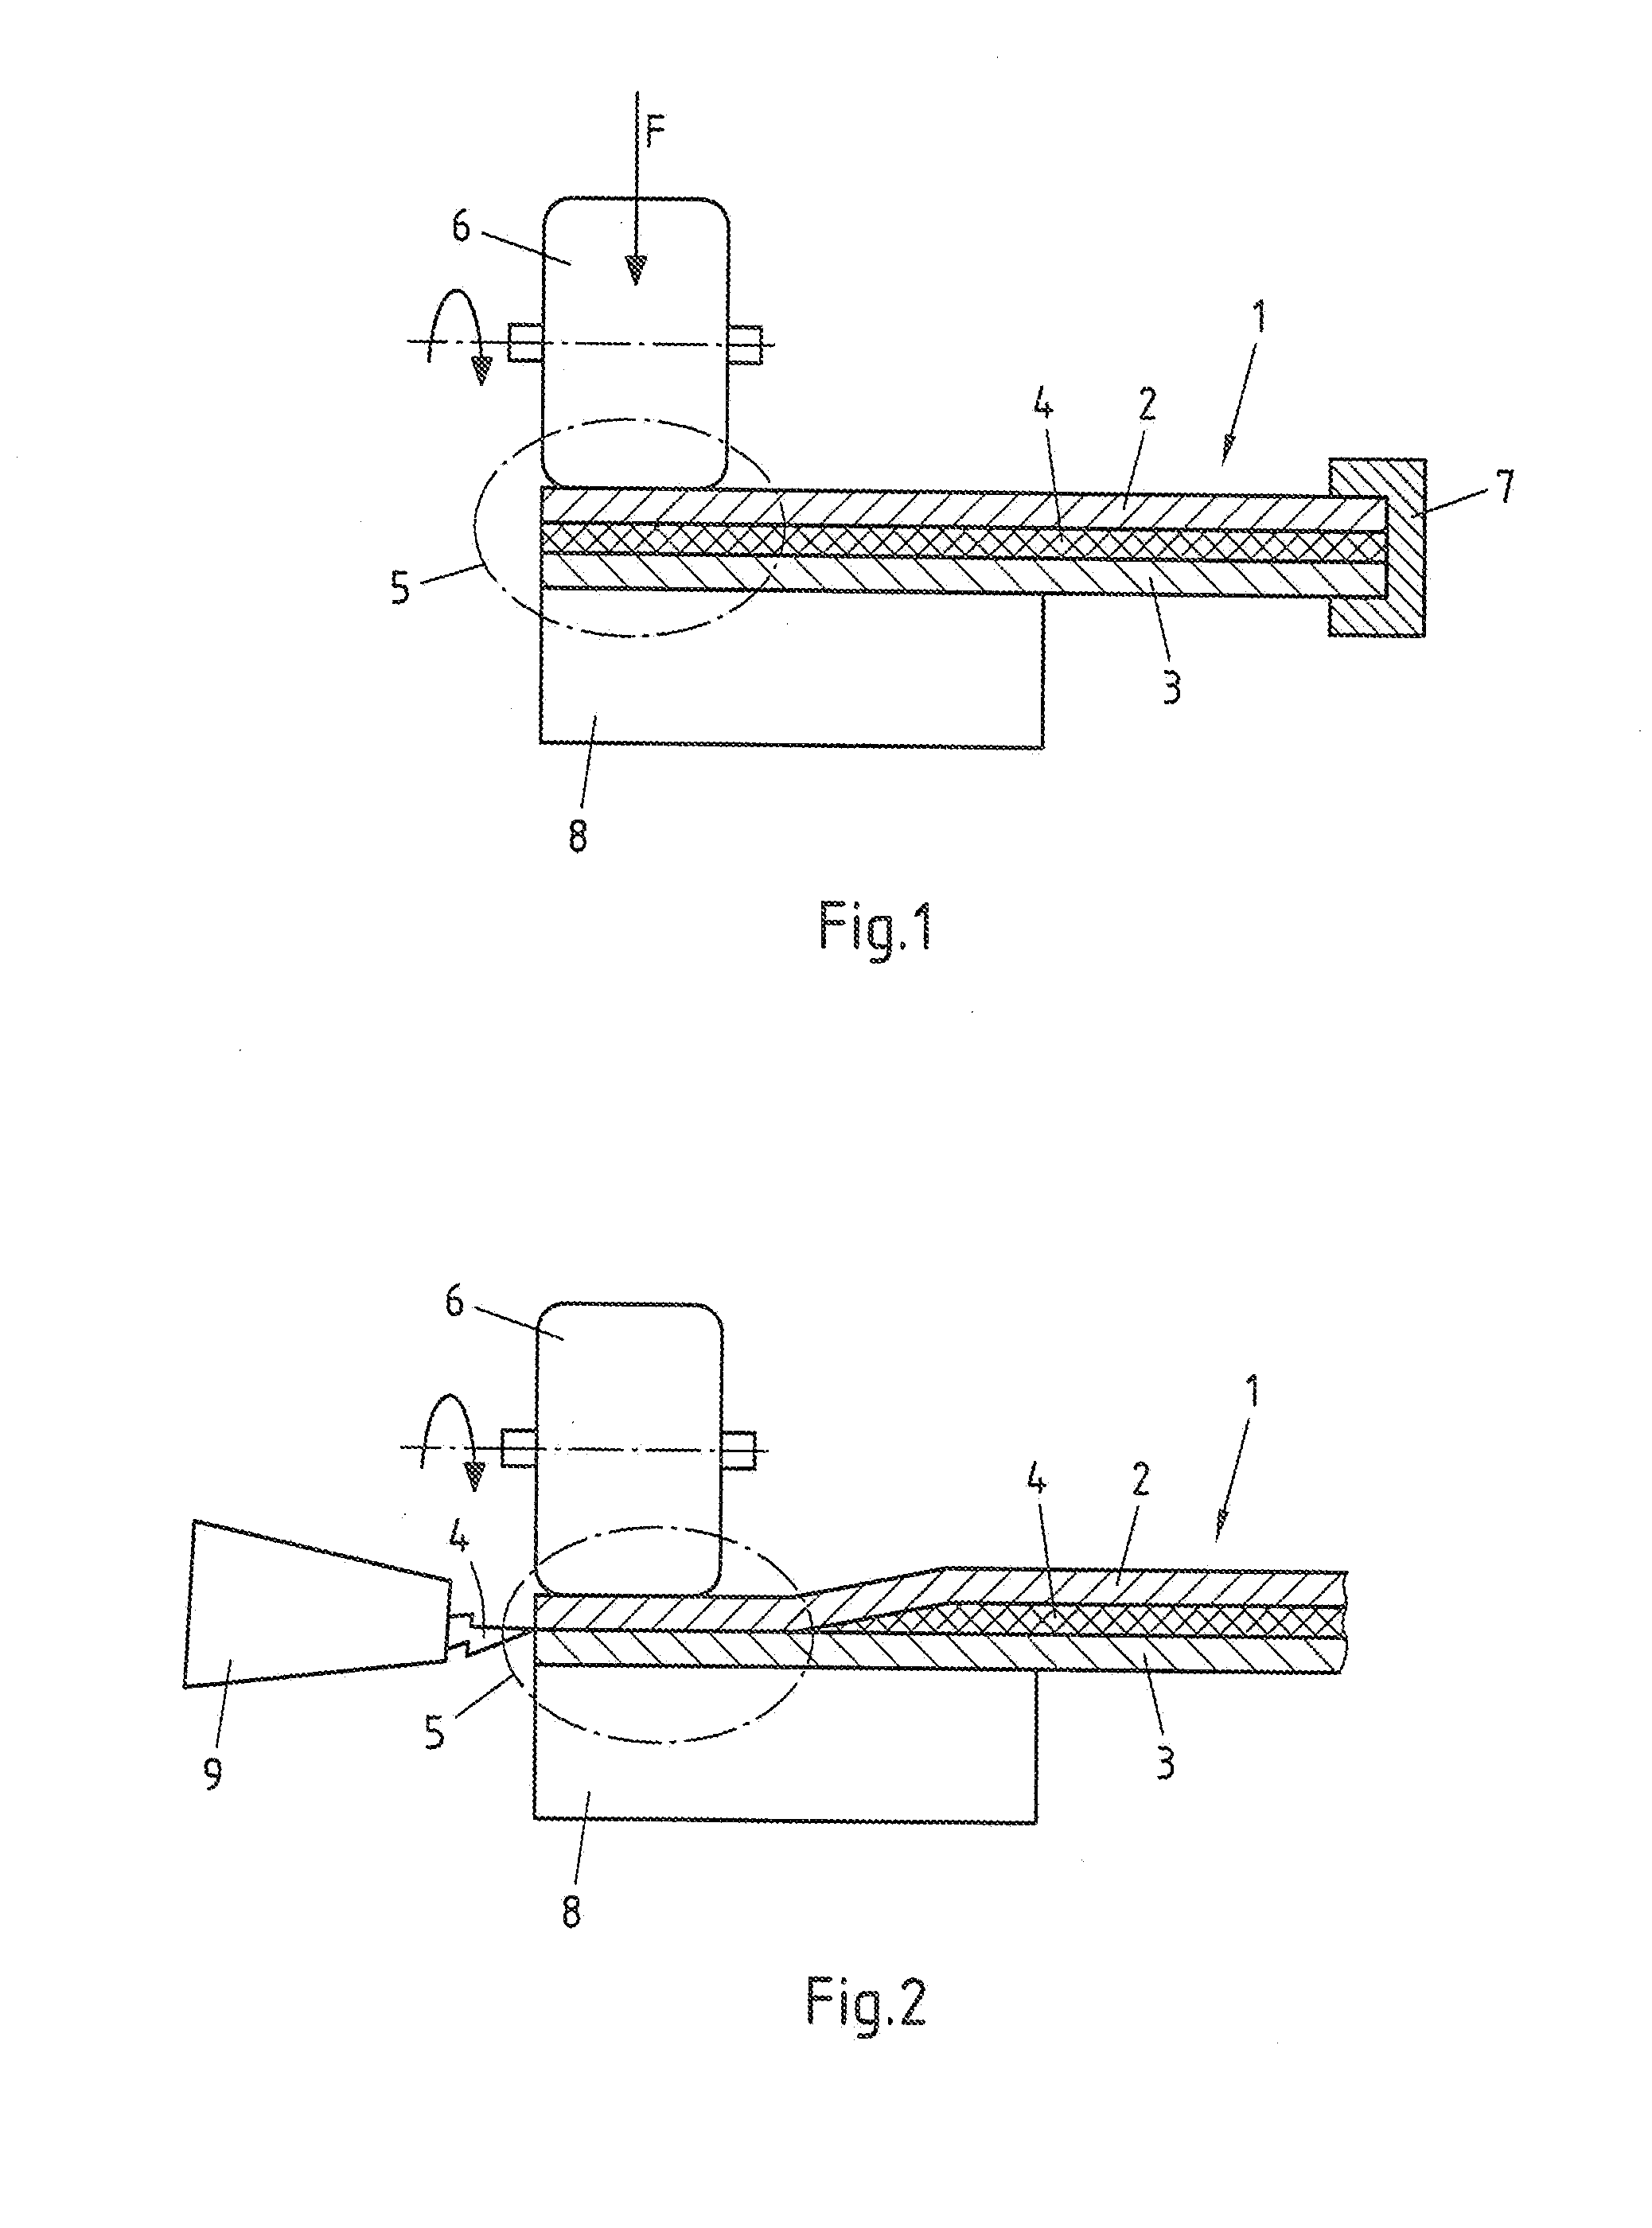 Method and Device for Producing a Composite Sheet-Metal Part with a Metal Edge Region